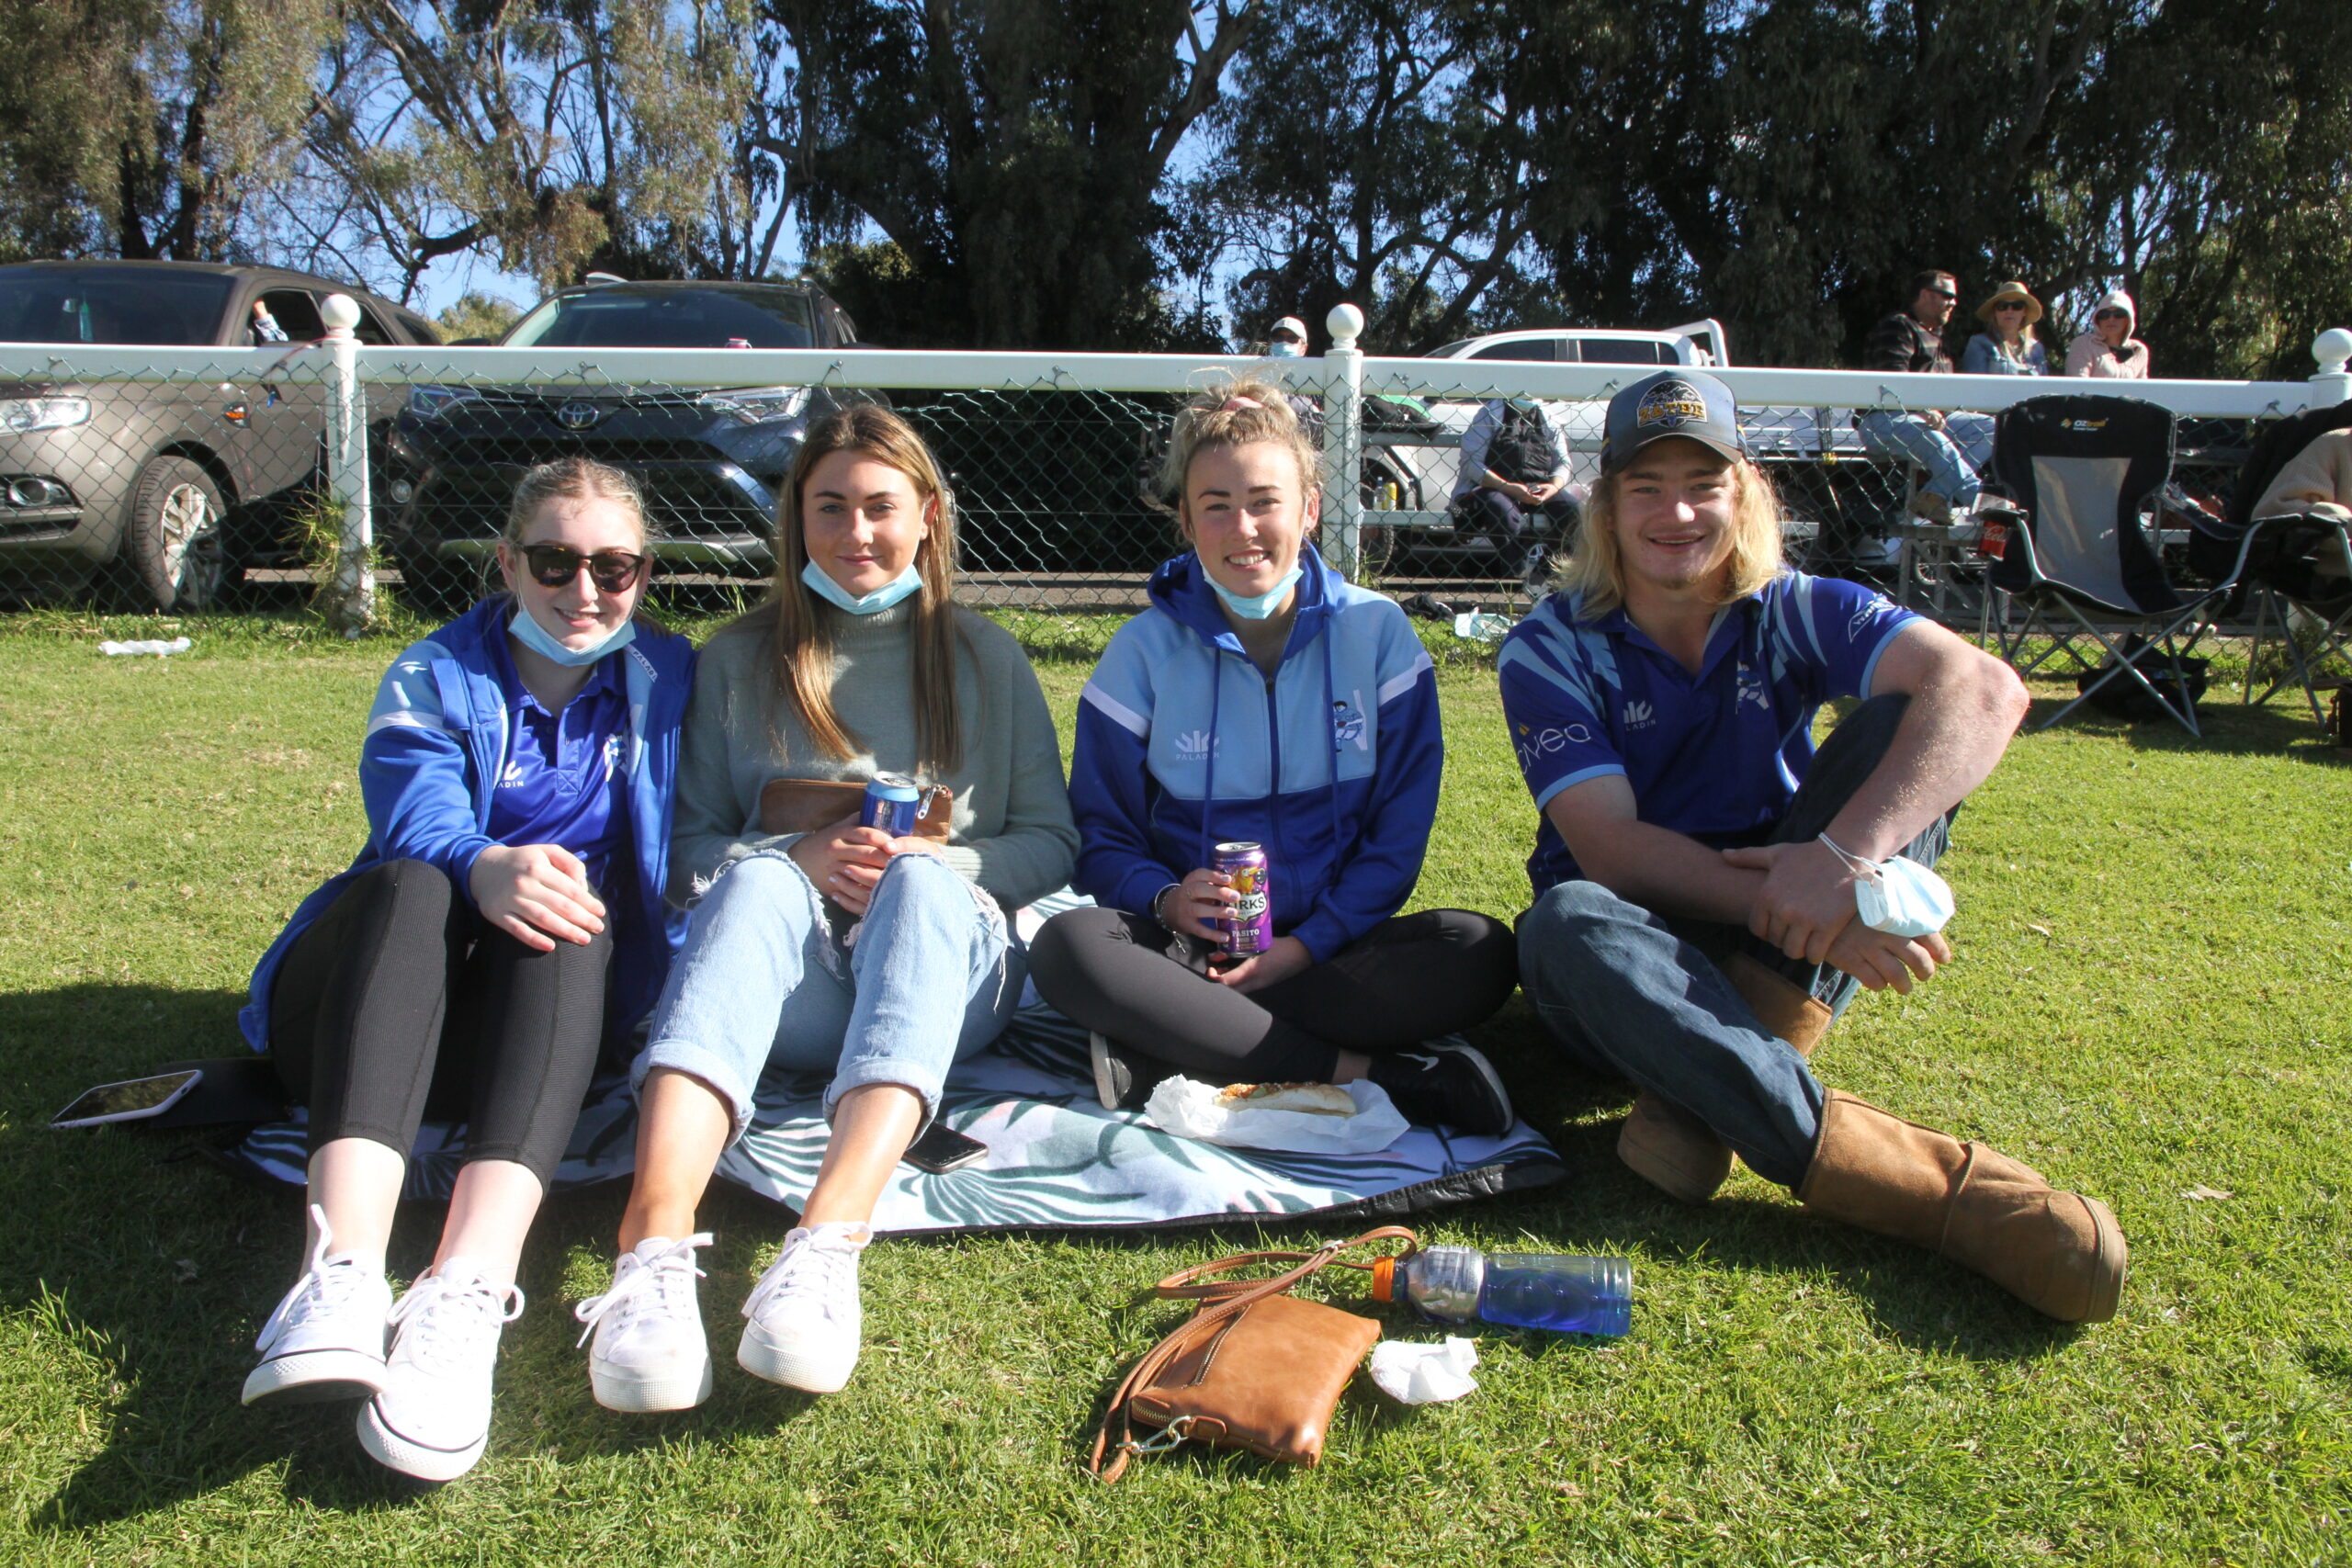 Ariarna Key, Amy Baguley, Taylah Fogarty and Kalab McMillan at Collins Park on Sunday to watch the rugby league.